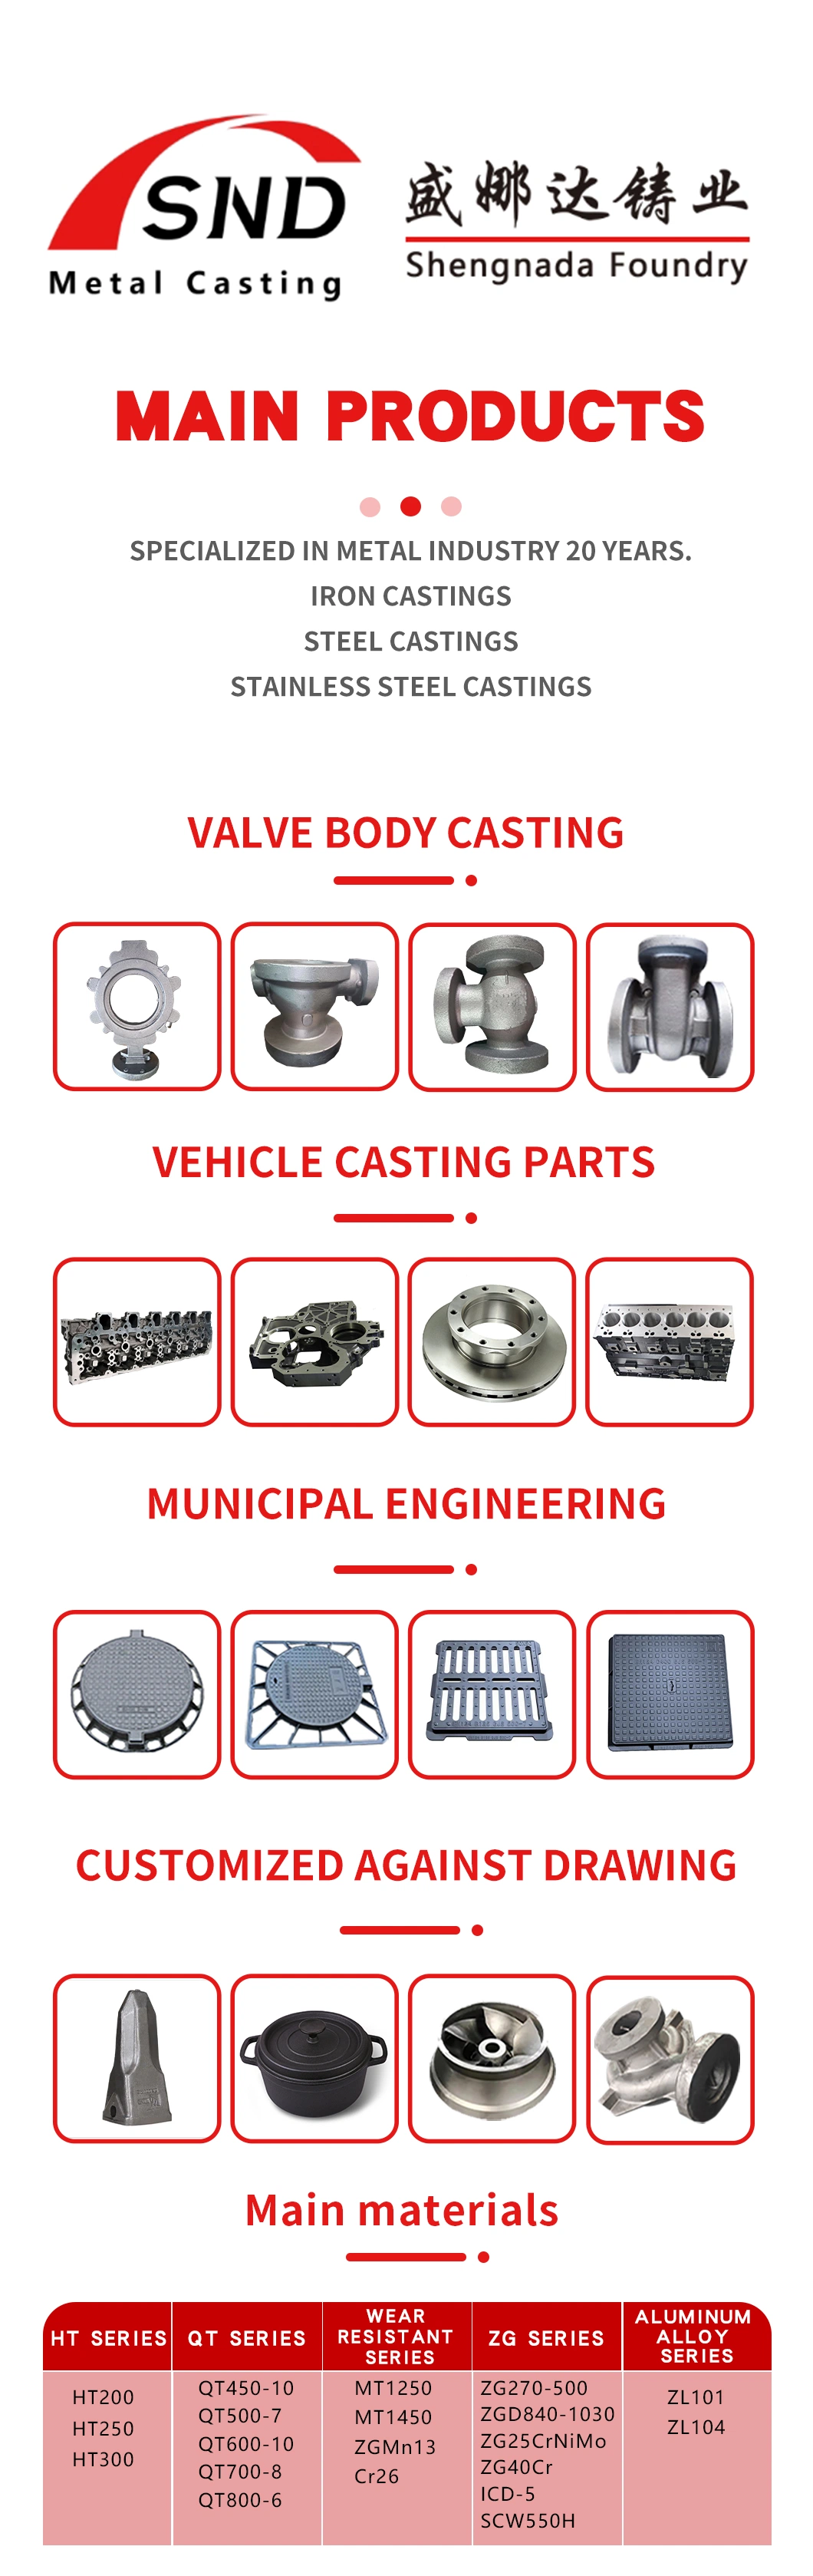 Supply Cast Iron Alloy Cast Steel by Sand Casting and CNC Machining